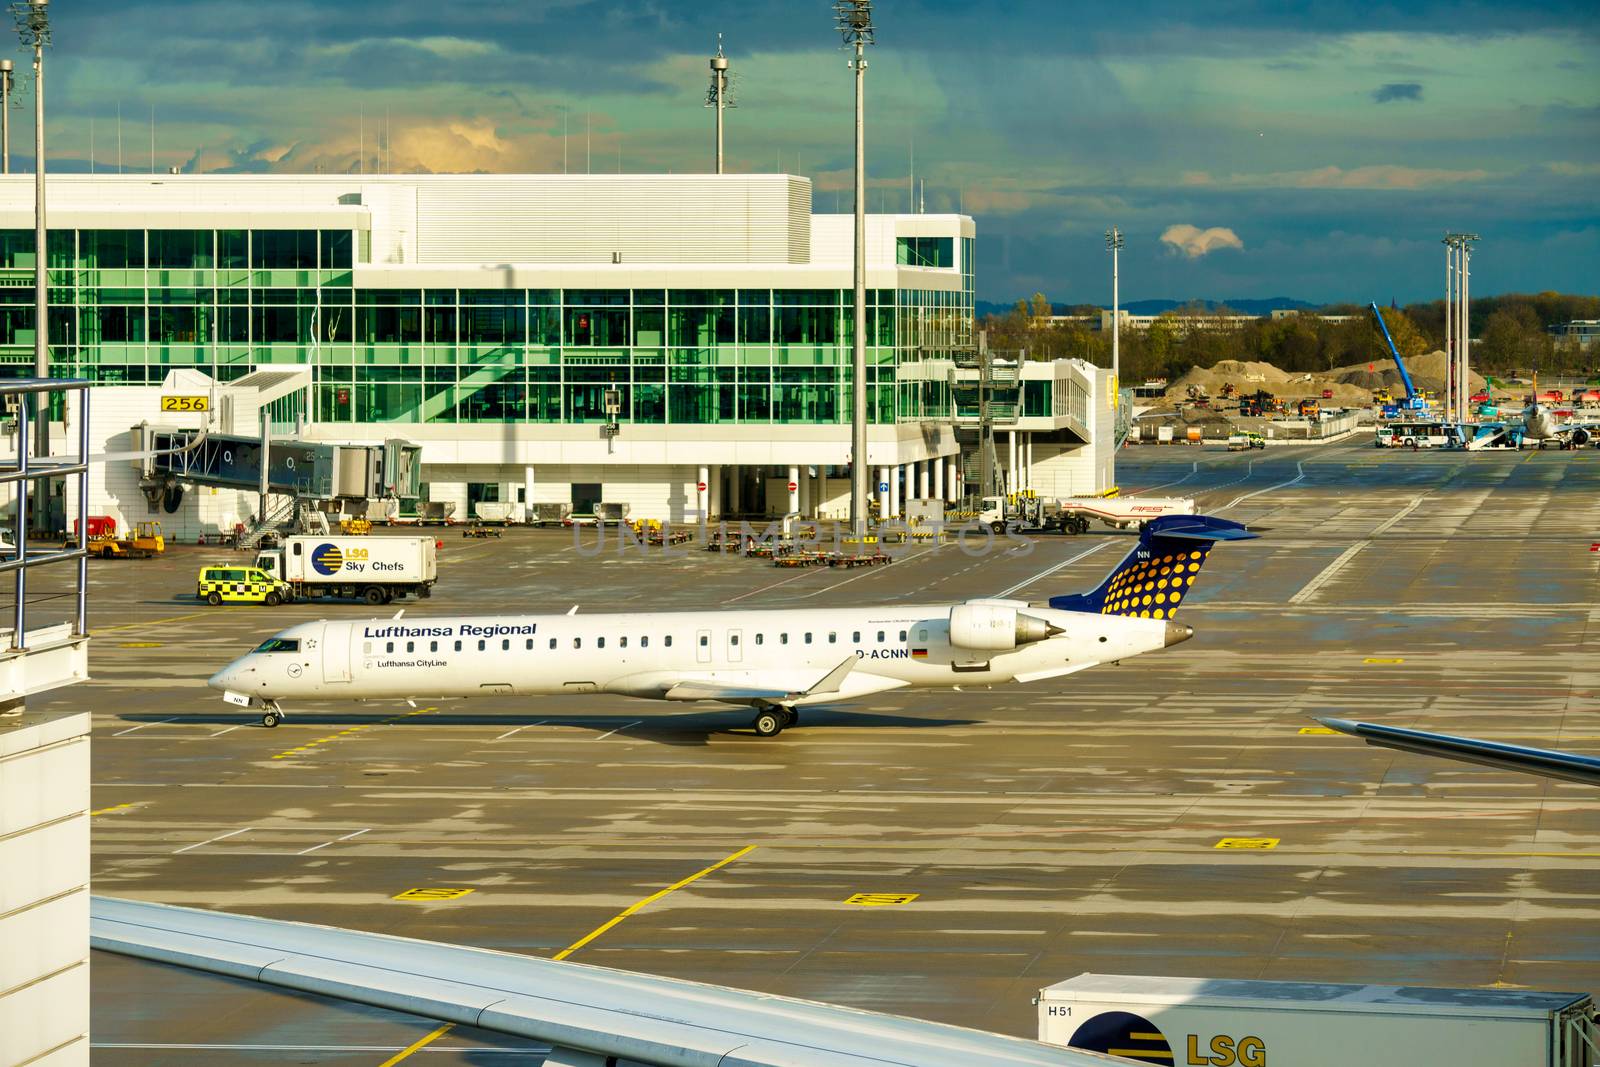 GERMANY, MUNICH - CIRCA 2020: Lufthansa Regional Airline Airplane getting ready for take off or landing at Munich airport. Travel concept